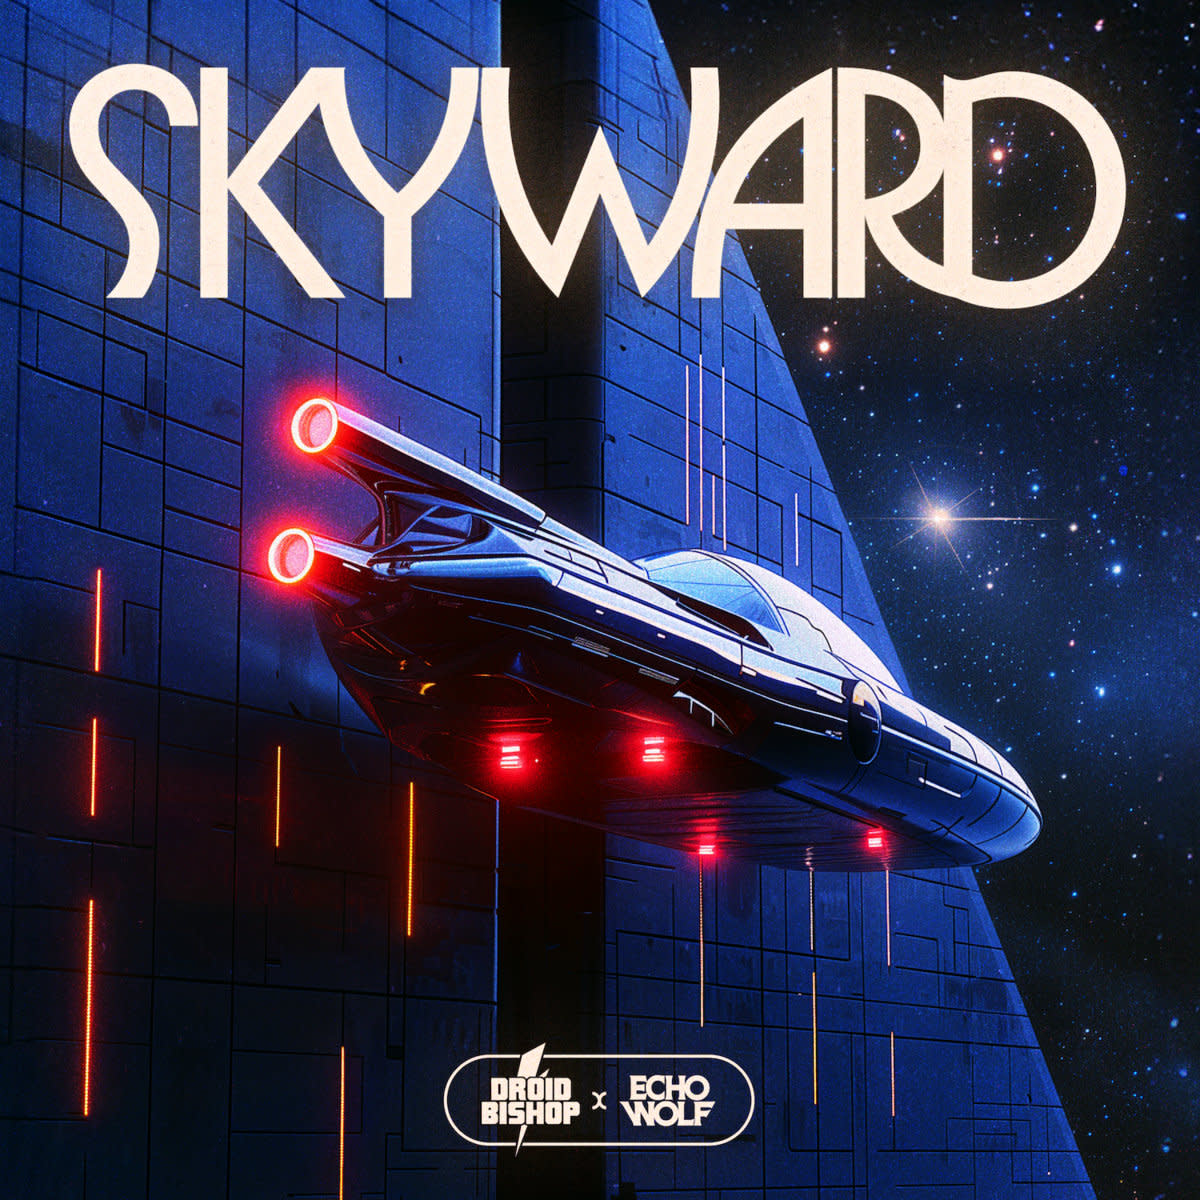 Synth Single Review: “Skyward’’ by Droid Bishop & Echo Wolf